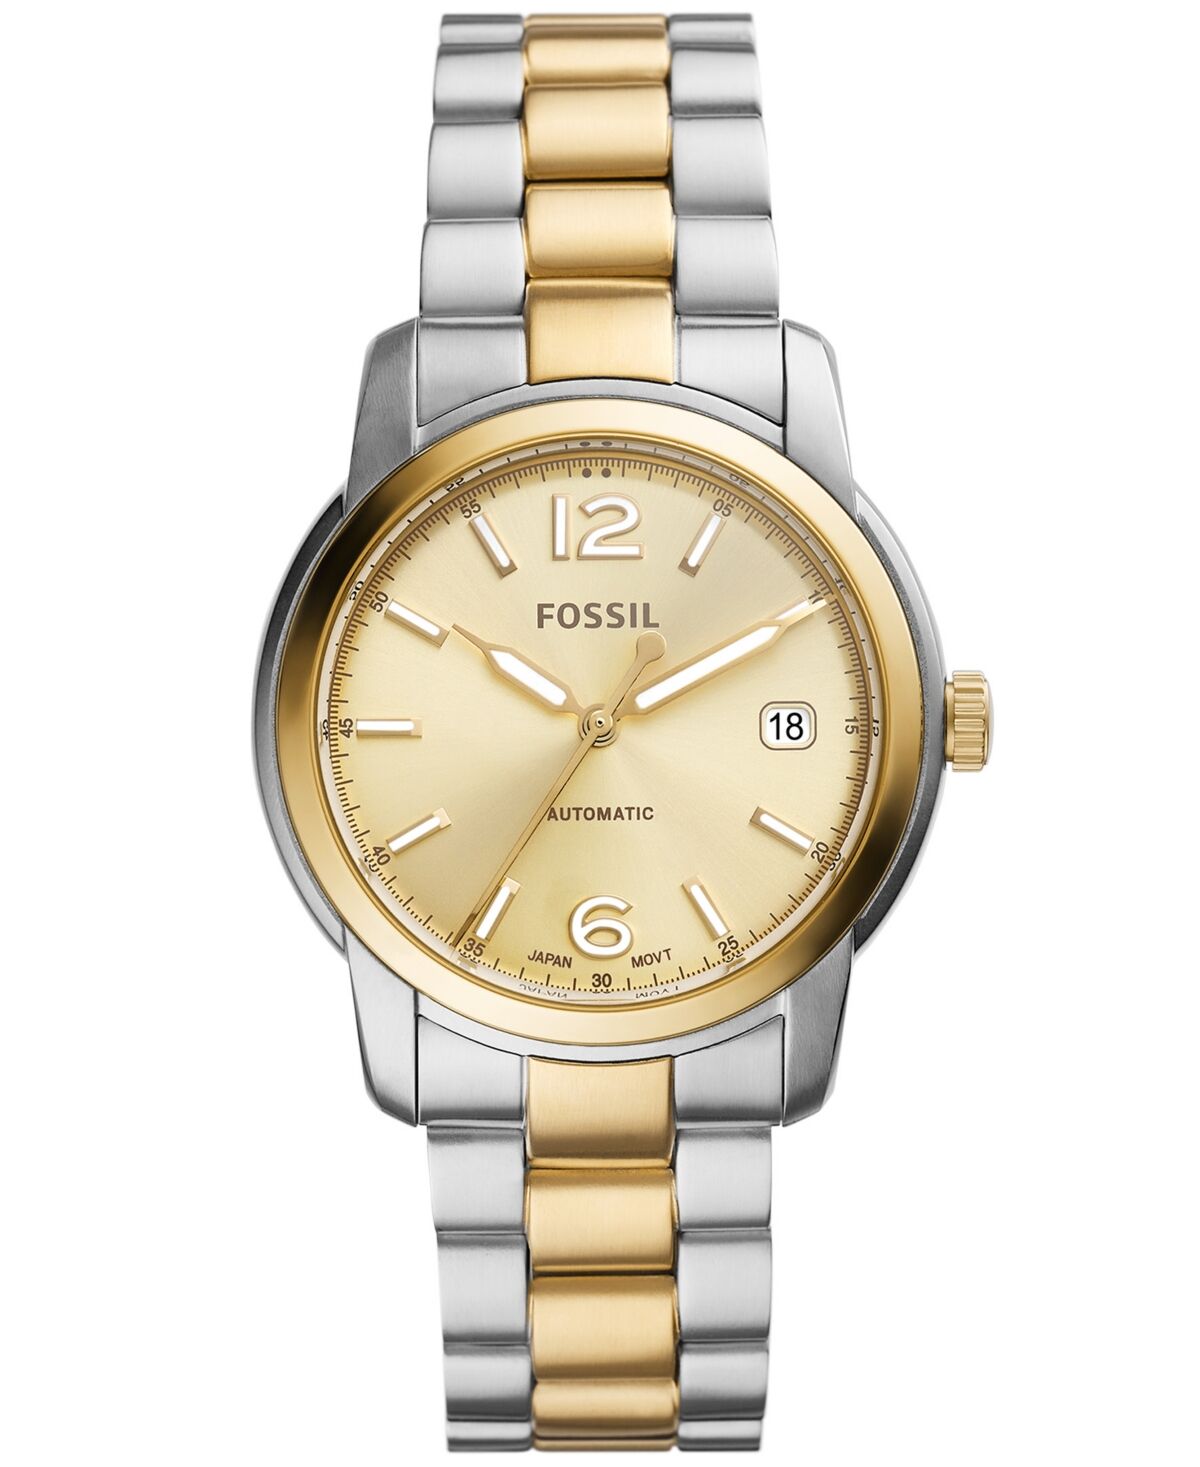 Fossil Women's Heritage Automatic Two Tone Stainless Steel Watch 38mm - Two Tone